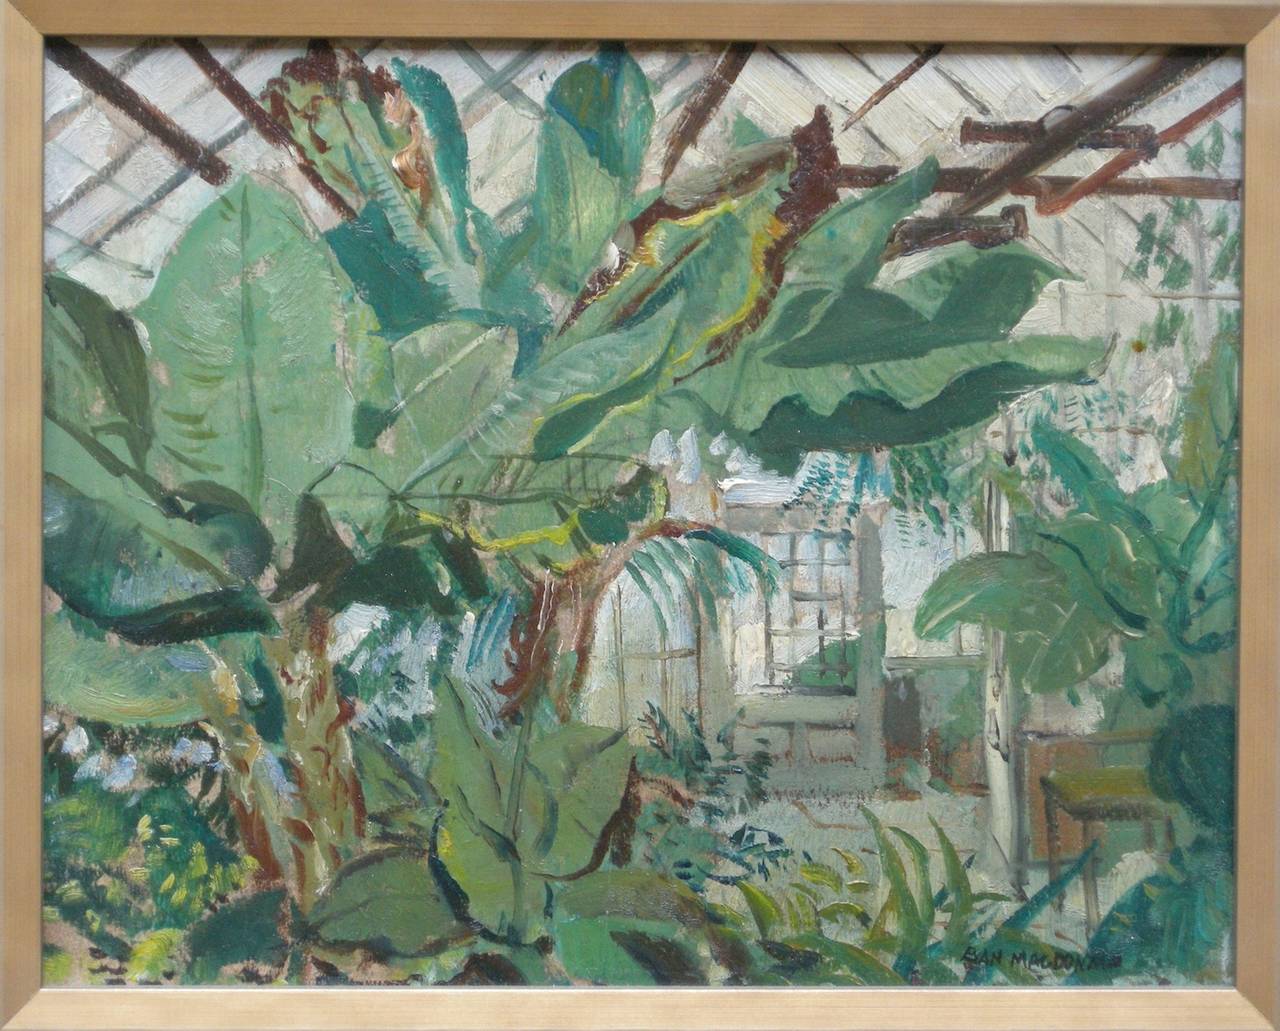 Tropical Plants - Painting by Evan Macdonald